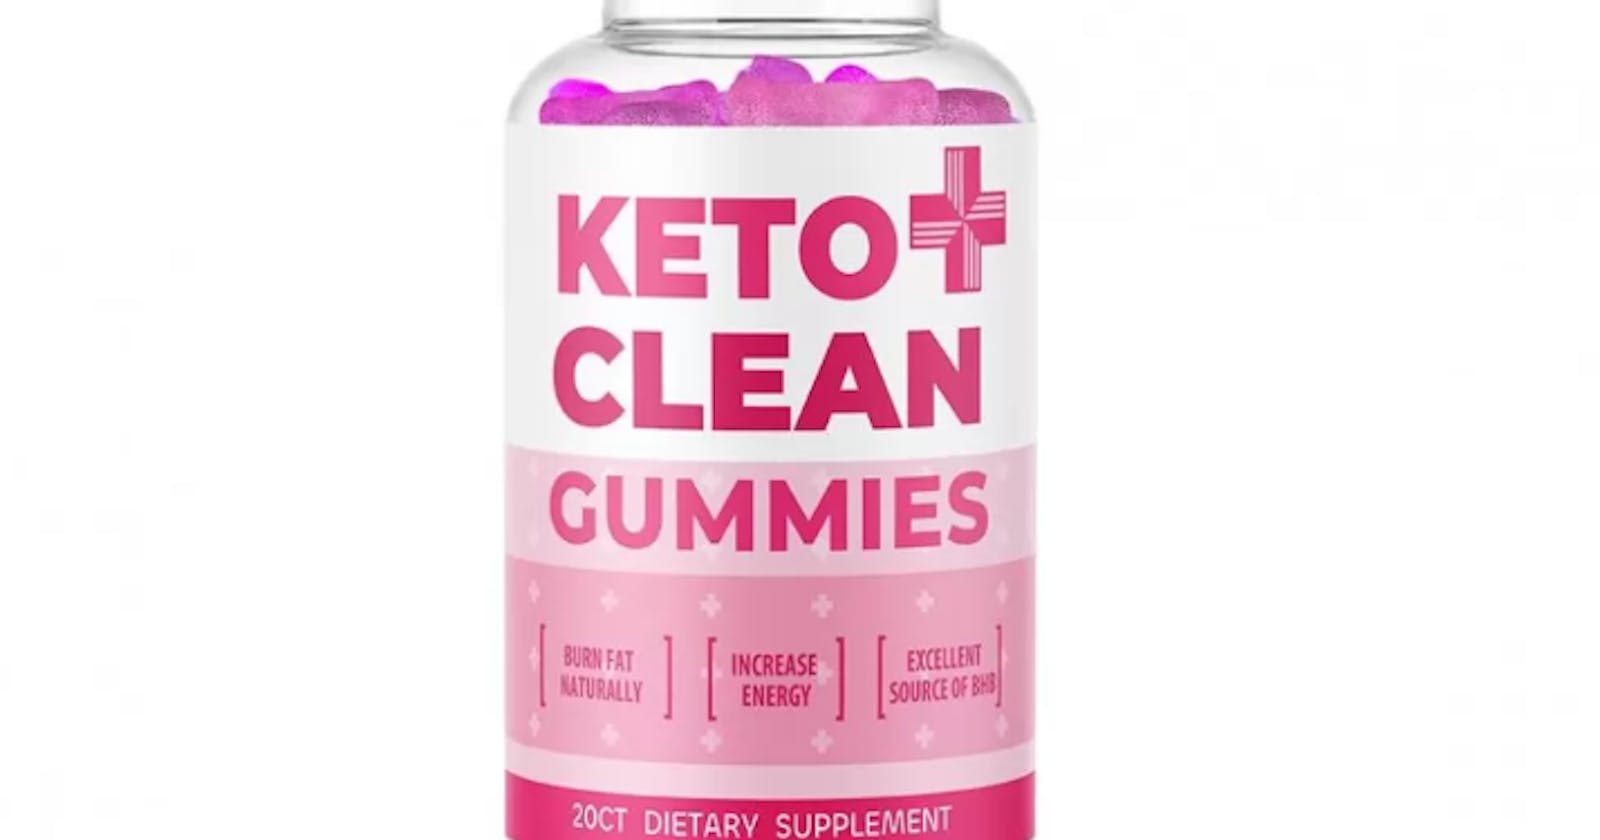 Keto Clean Gummies: Does It 100% Clinically Proven Or It's Safe?